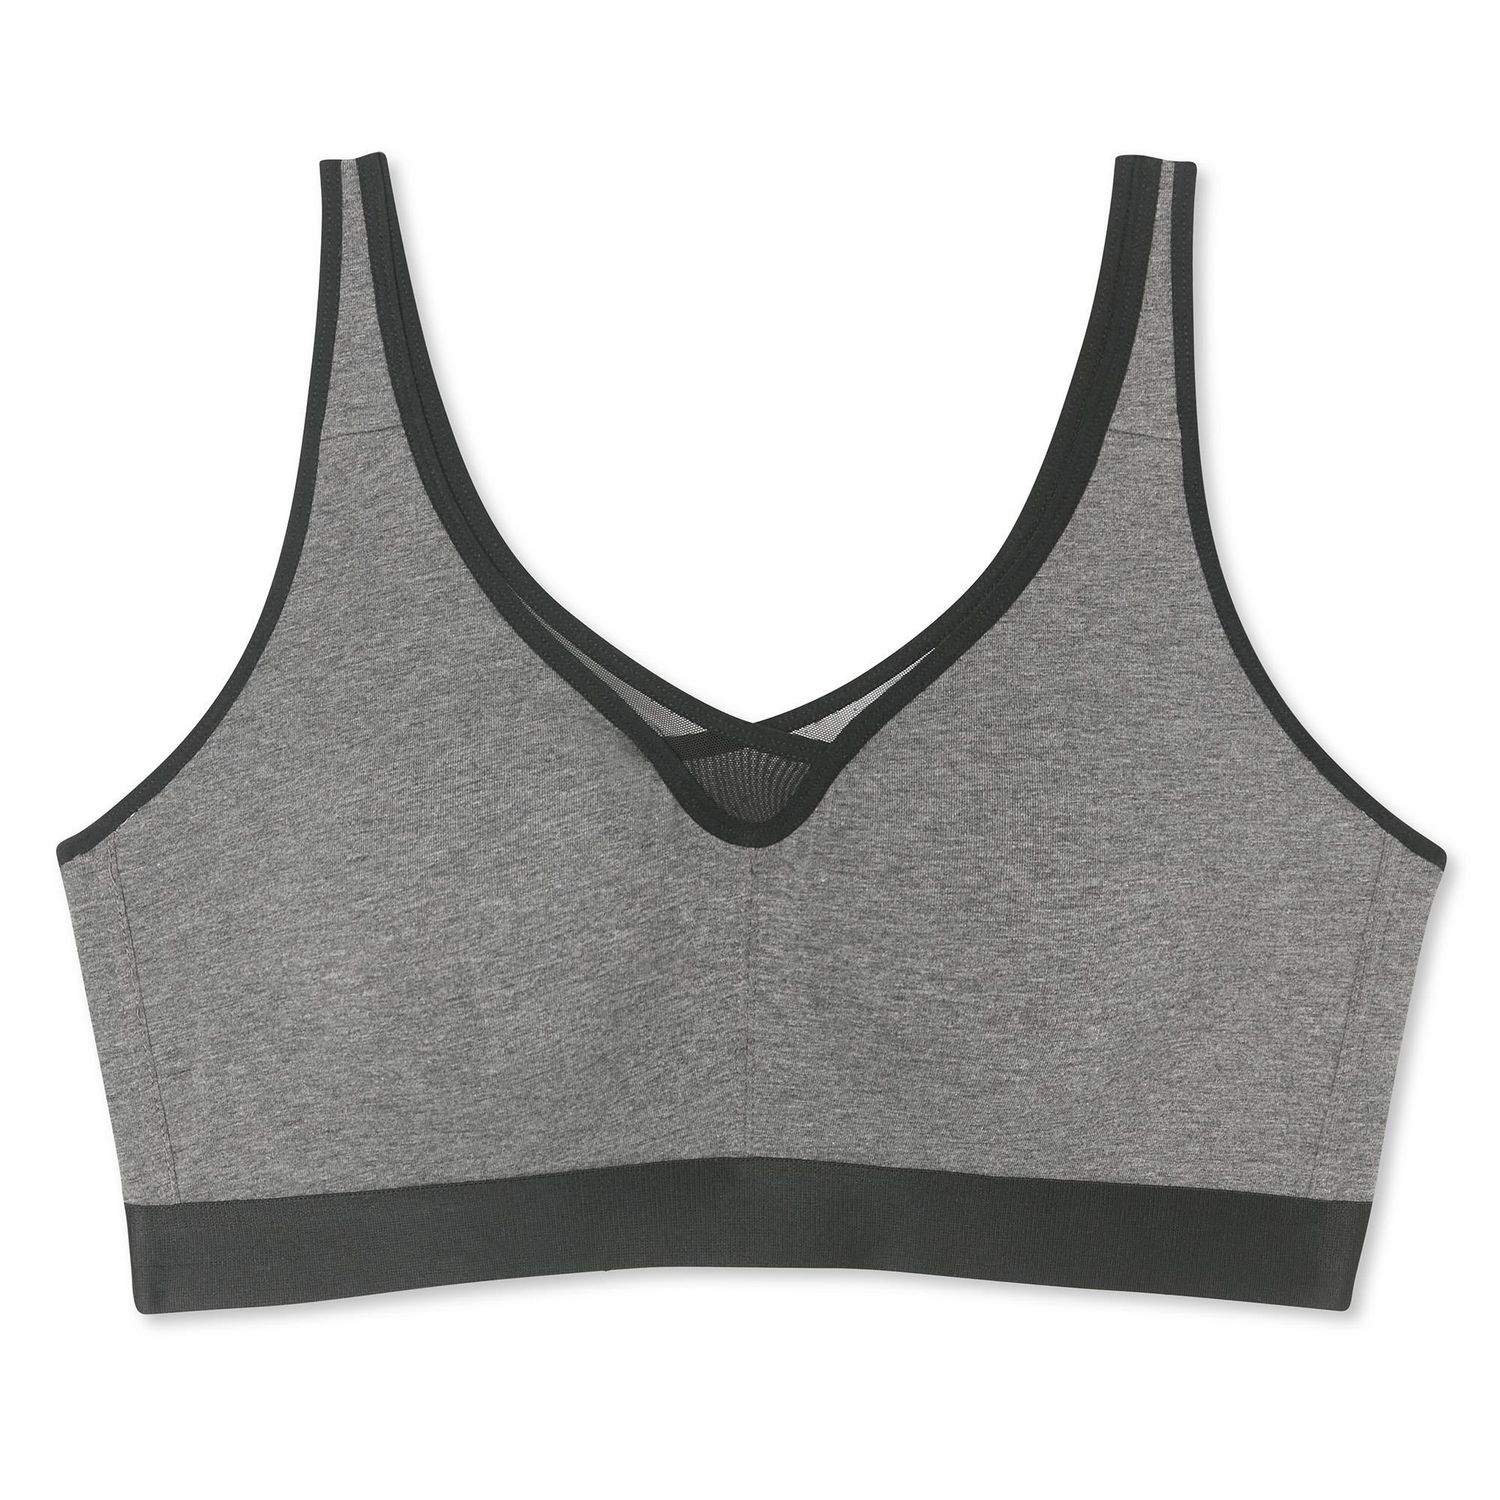 Women's Plus Size High Support Bonded Sports Bra - All in Motion Charcoal  Gray 3X